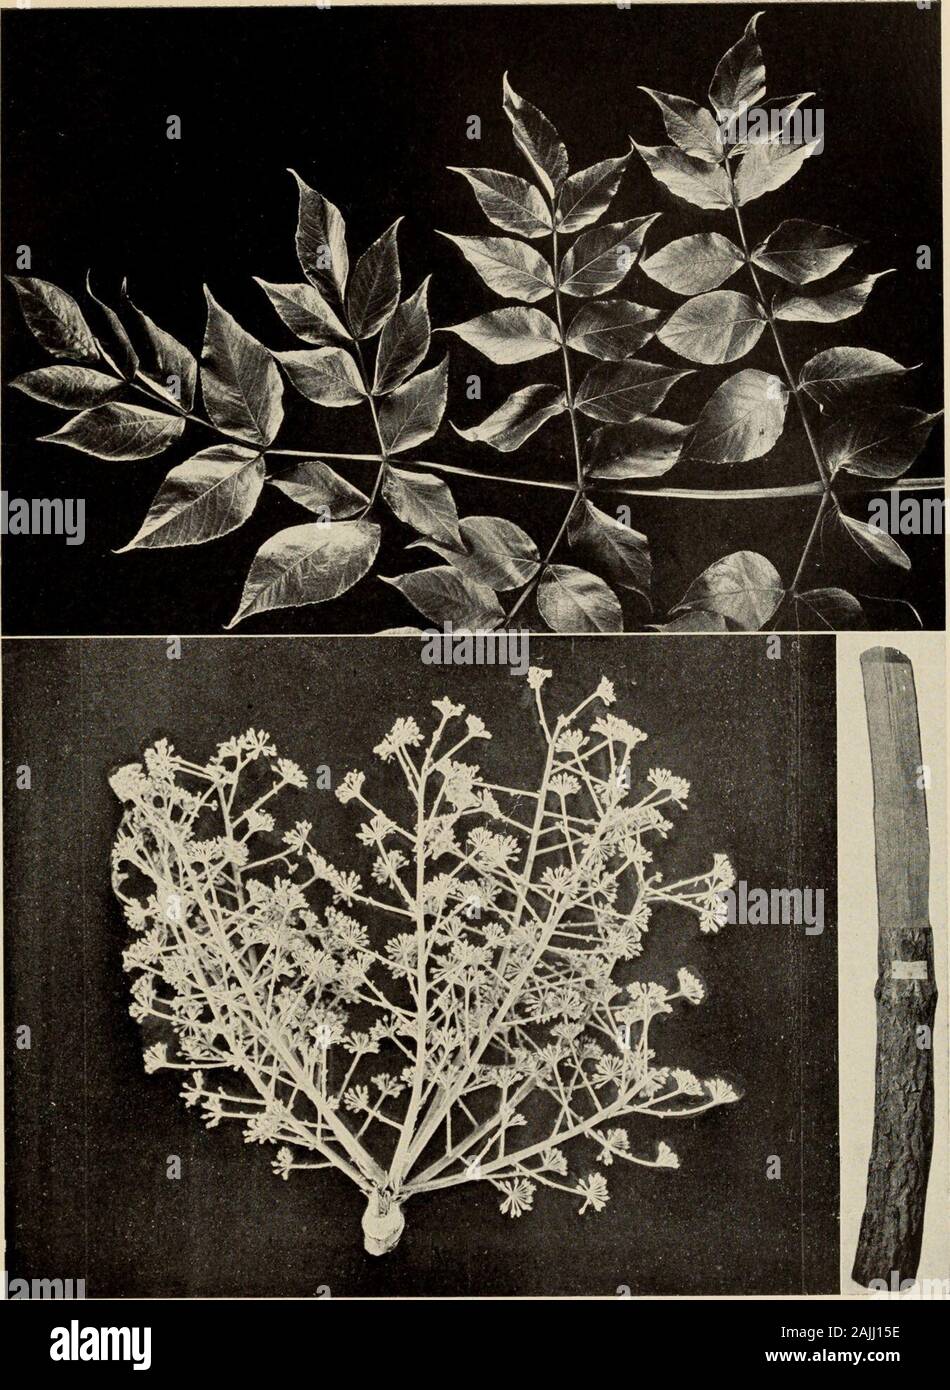 The tree book : A popular guide to a knowledge of the trees of North America and to their uses and cultivation . h club-like branches, 25 to 35 feet high,or an unbranched shrubby cluster of shoots from undergroundstems, 6 to 15 feet high in one season. Bark dark brown, furrowedby wide, shallow cracks between rounded ridges. Wood light,brittle, pale brown, soft. Buds: terminal, large, blunt; lateral,flat, small, triangular. Leaves clustered near top of branch, 3to 4 feet long, 1 to i feet wide, twice compound, on stout,spiny petioles; leaflets oval, pointed, with toothed margins;yellow in autu Stock Photo